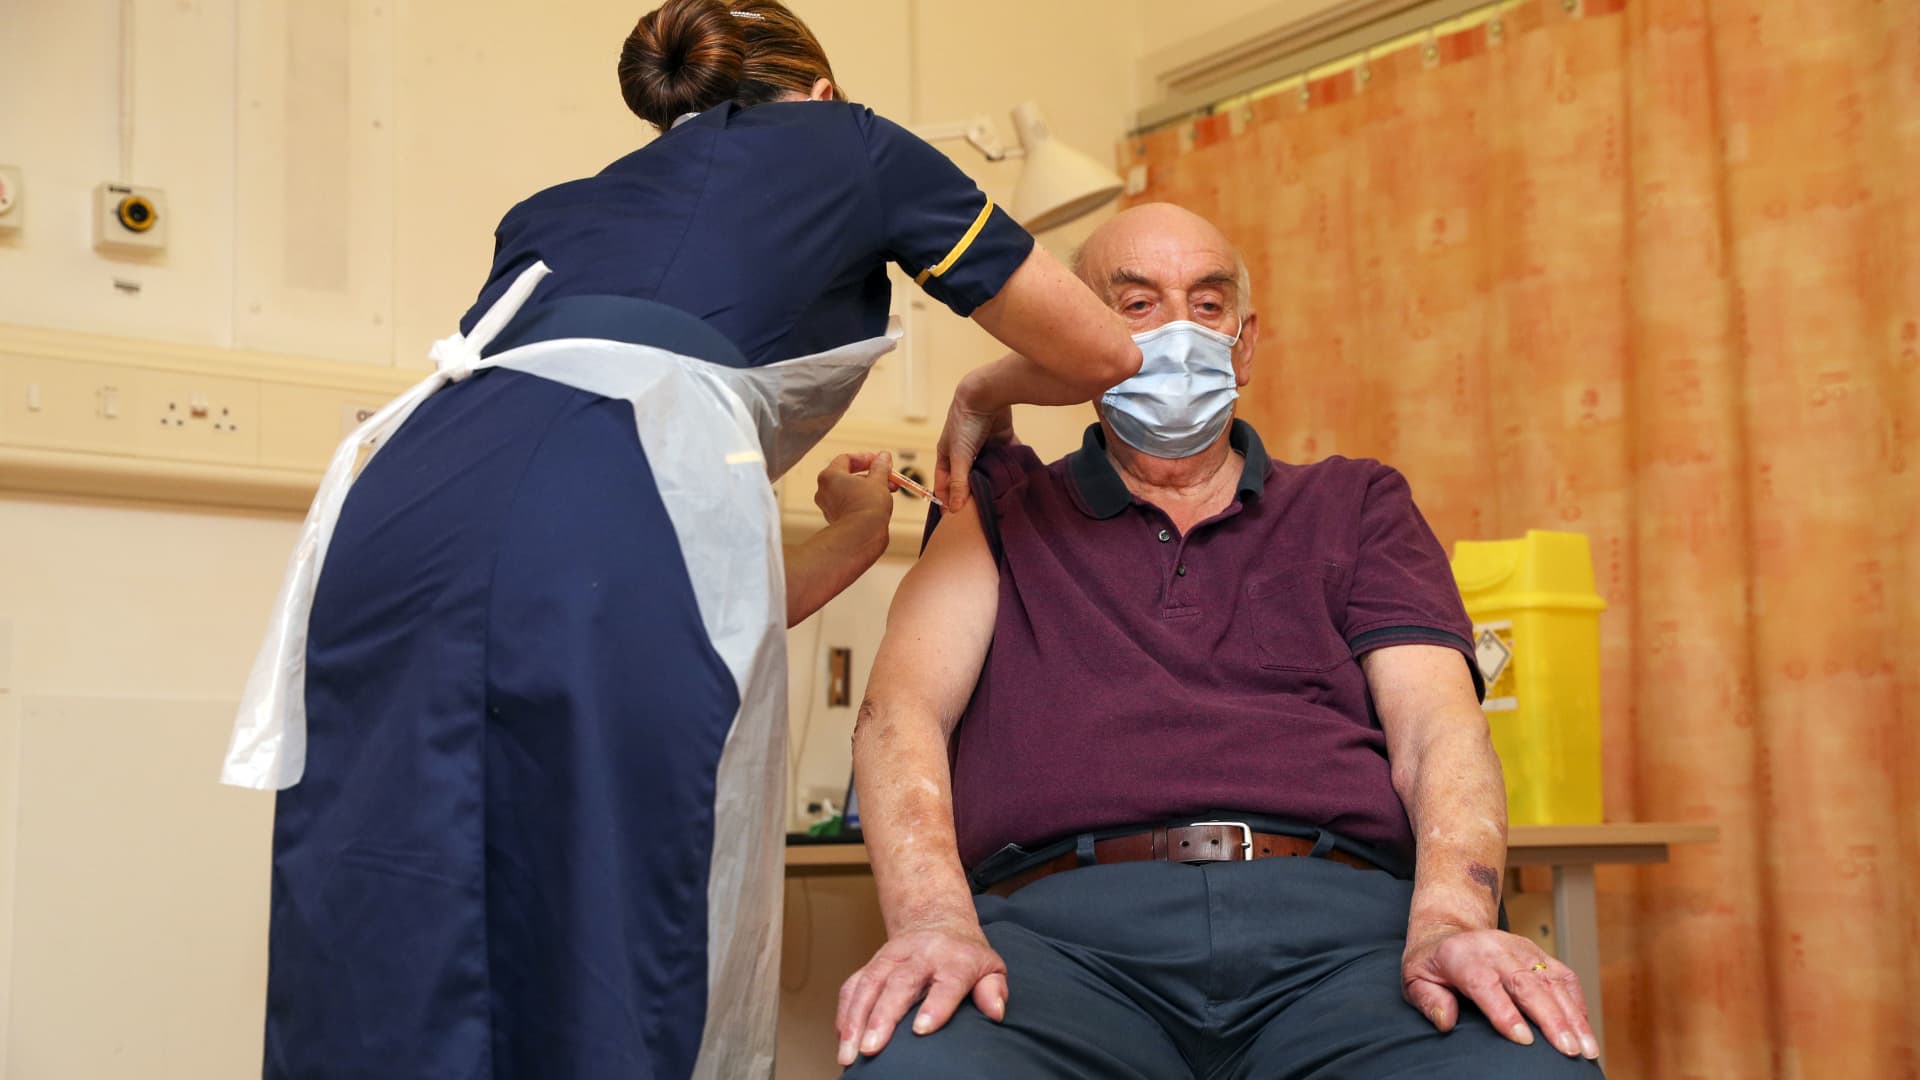 82-year-old Brian Pinker receives the Oxford University/AstraZeneca COVID-19 vaccine from nurse Sam Foster at the Churchill Hospital in Oxford as the NHS increases its vaccination program with 530,000 doses of the newly approved jab available for rollout across the UK on January 4, 2021 in London, England. (Photo by Steve Parsons - WPA Pool/Getty Images)